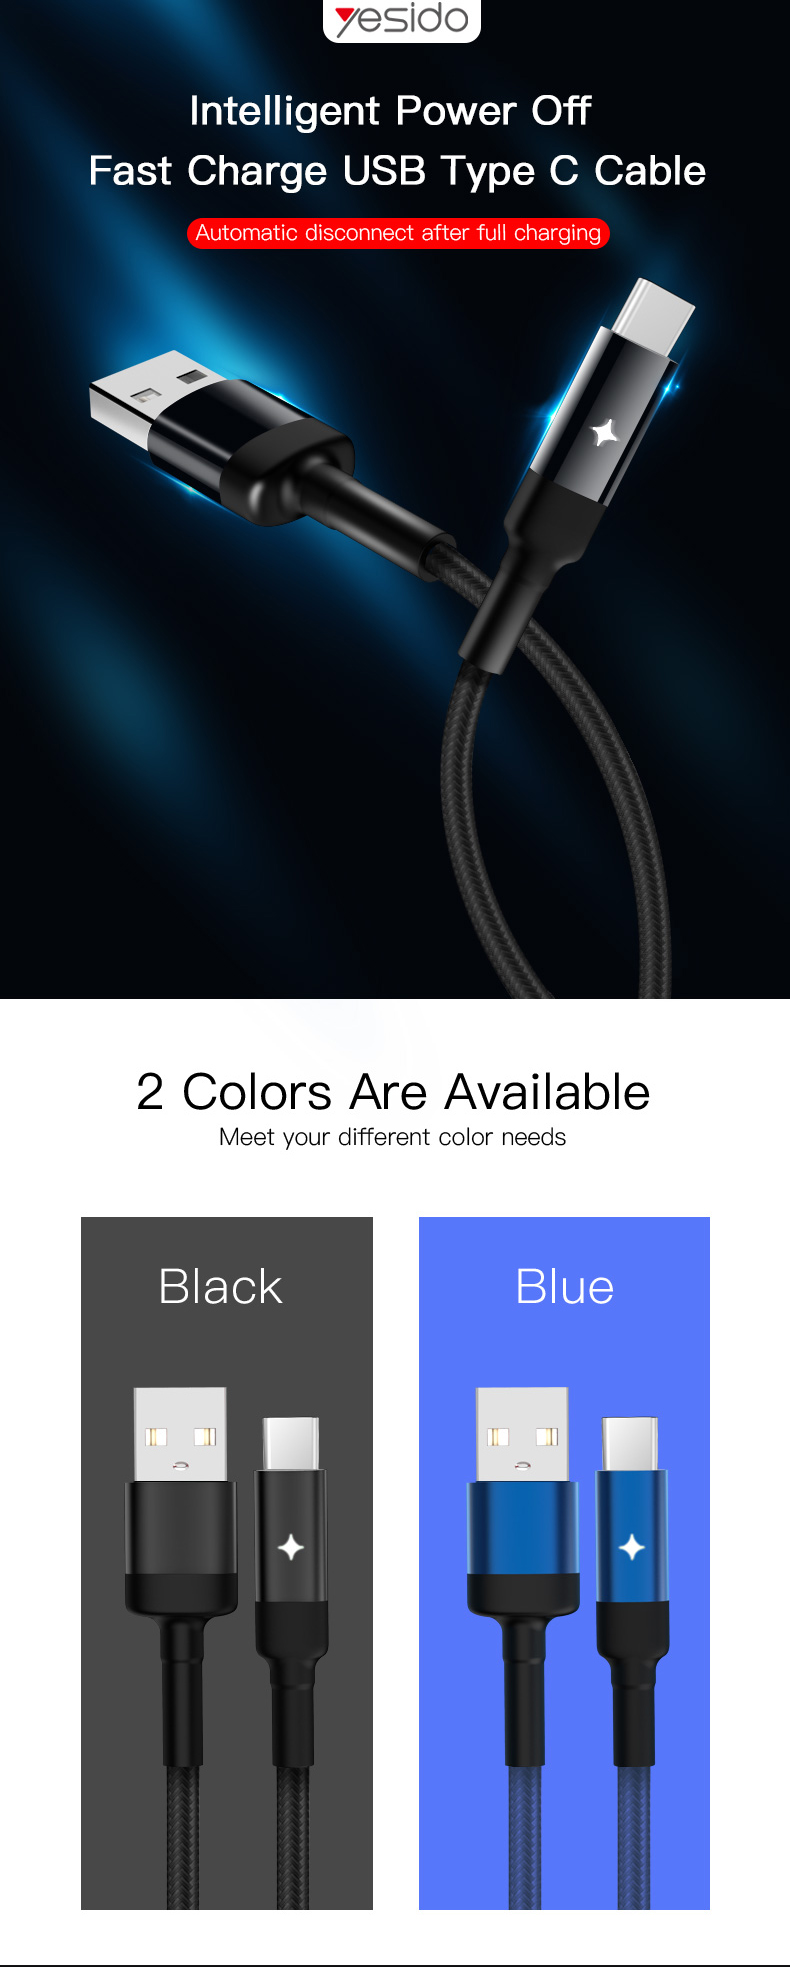 Yesido CA28 LED Smart Power Off USB Type C Cable Fast Charging Data Cable For Samsung S10 S9 Huawei LG